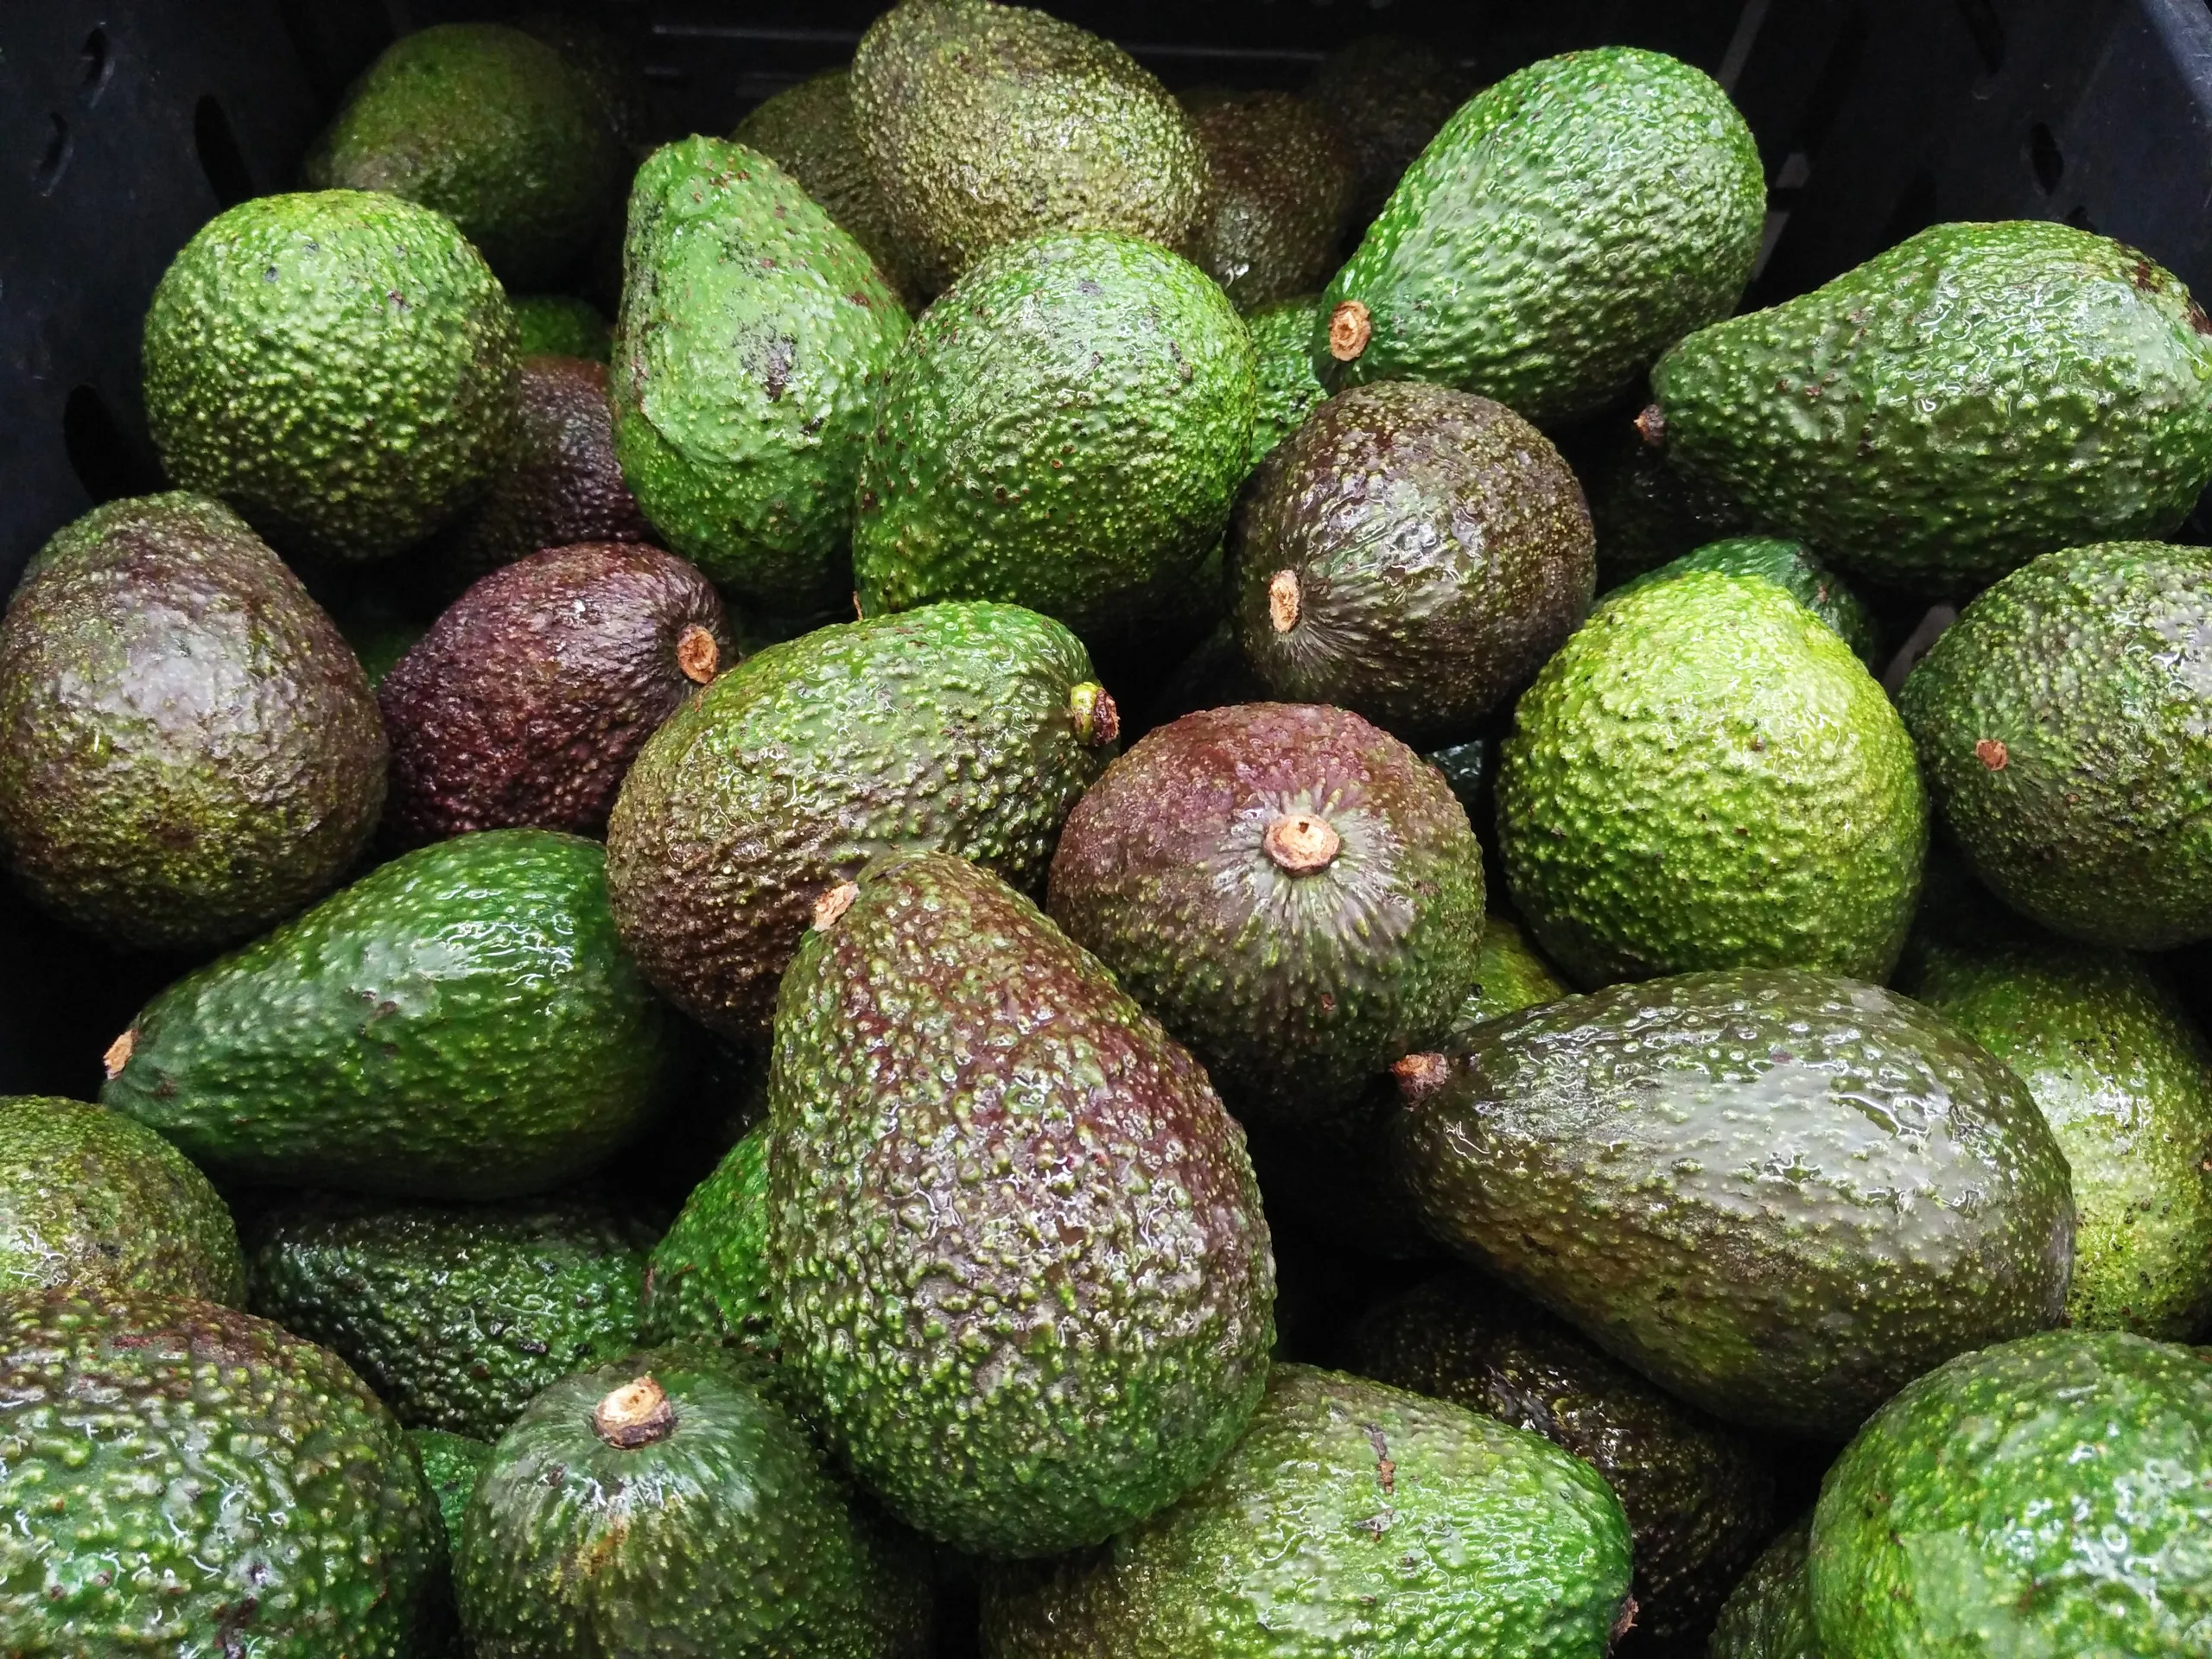 General health benefits of avocados that impact your sex life!